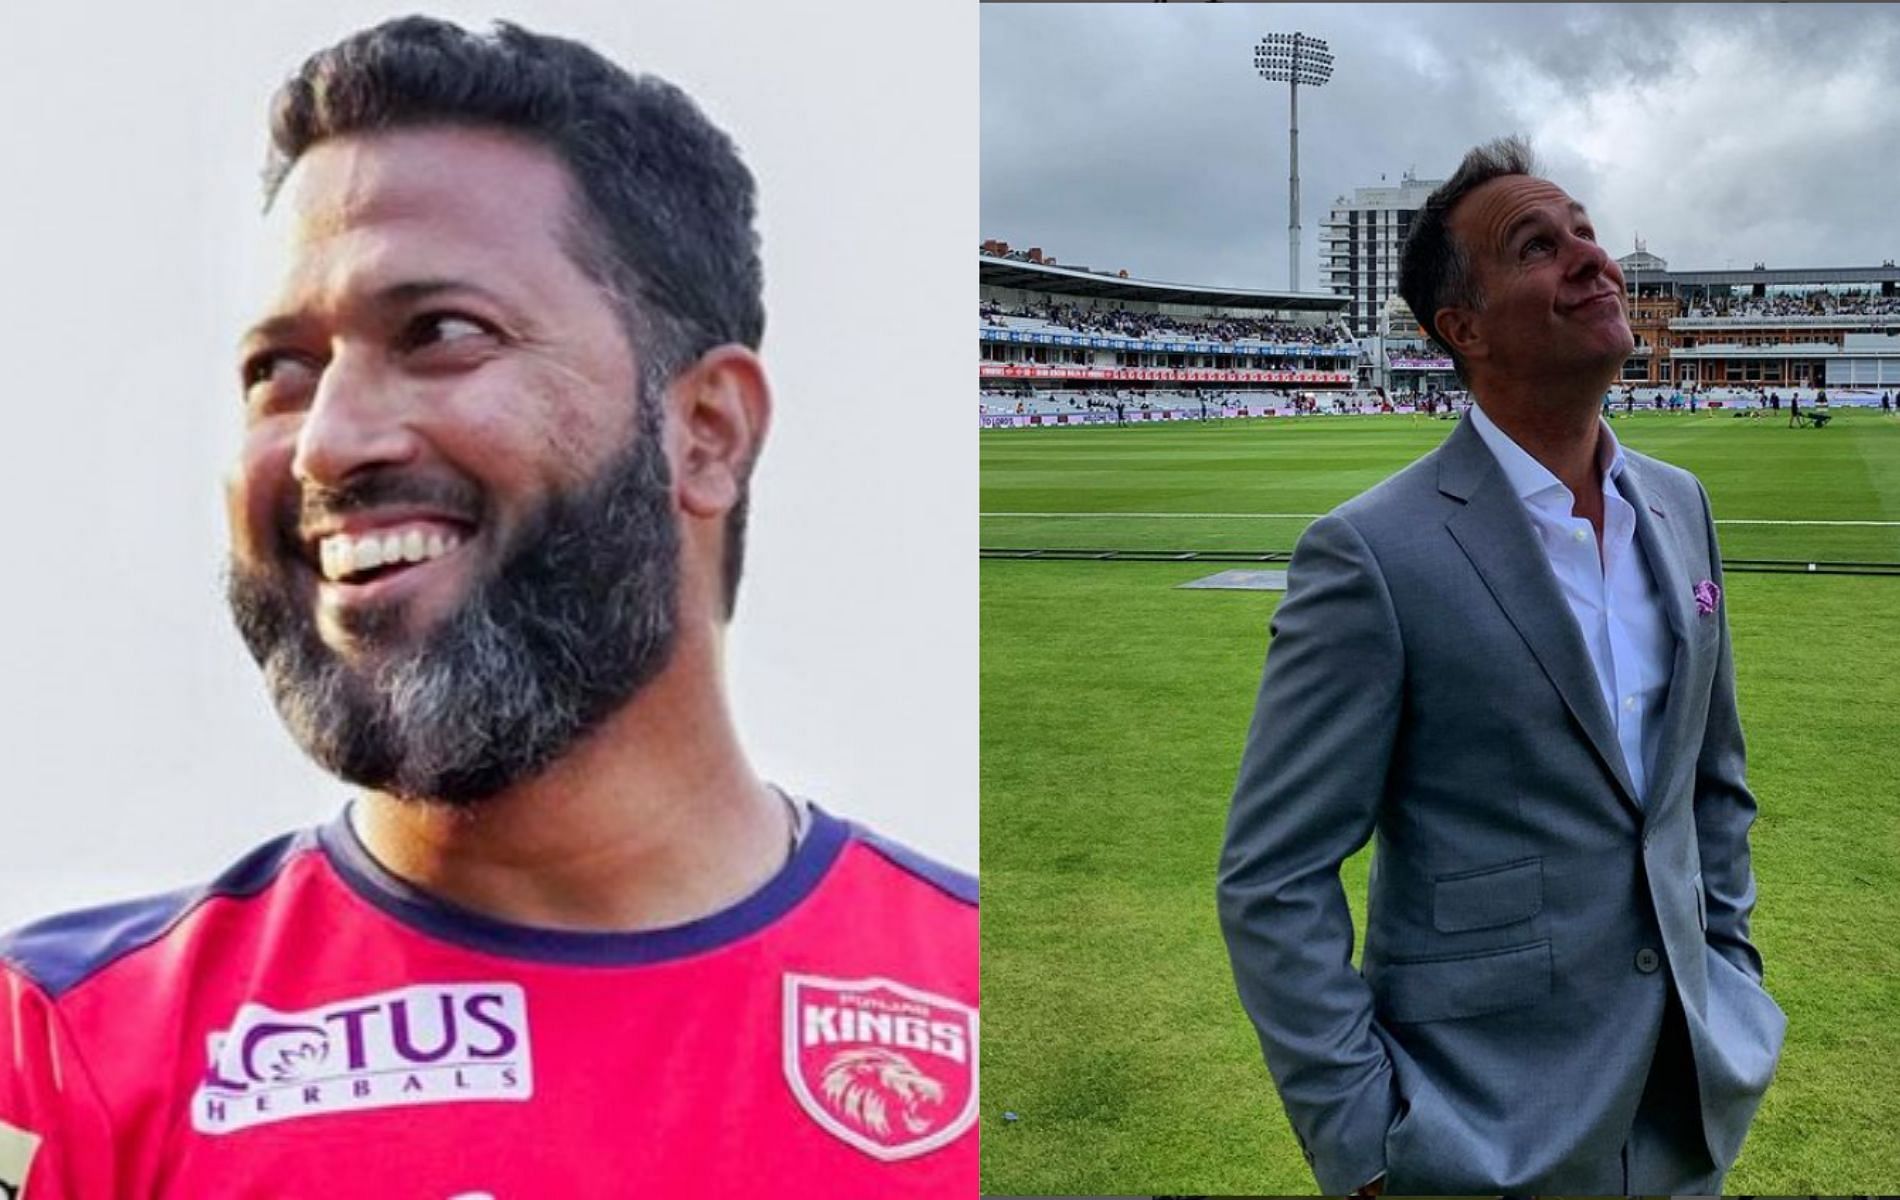 Wasim Jaffer and Michael Vaughan continued their banter after the 3rd Test between South Africa and India.